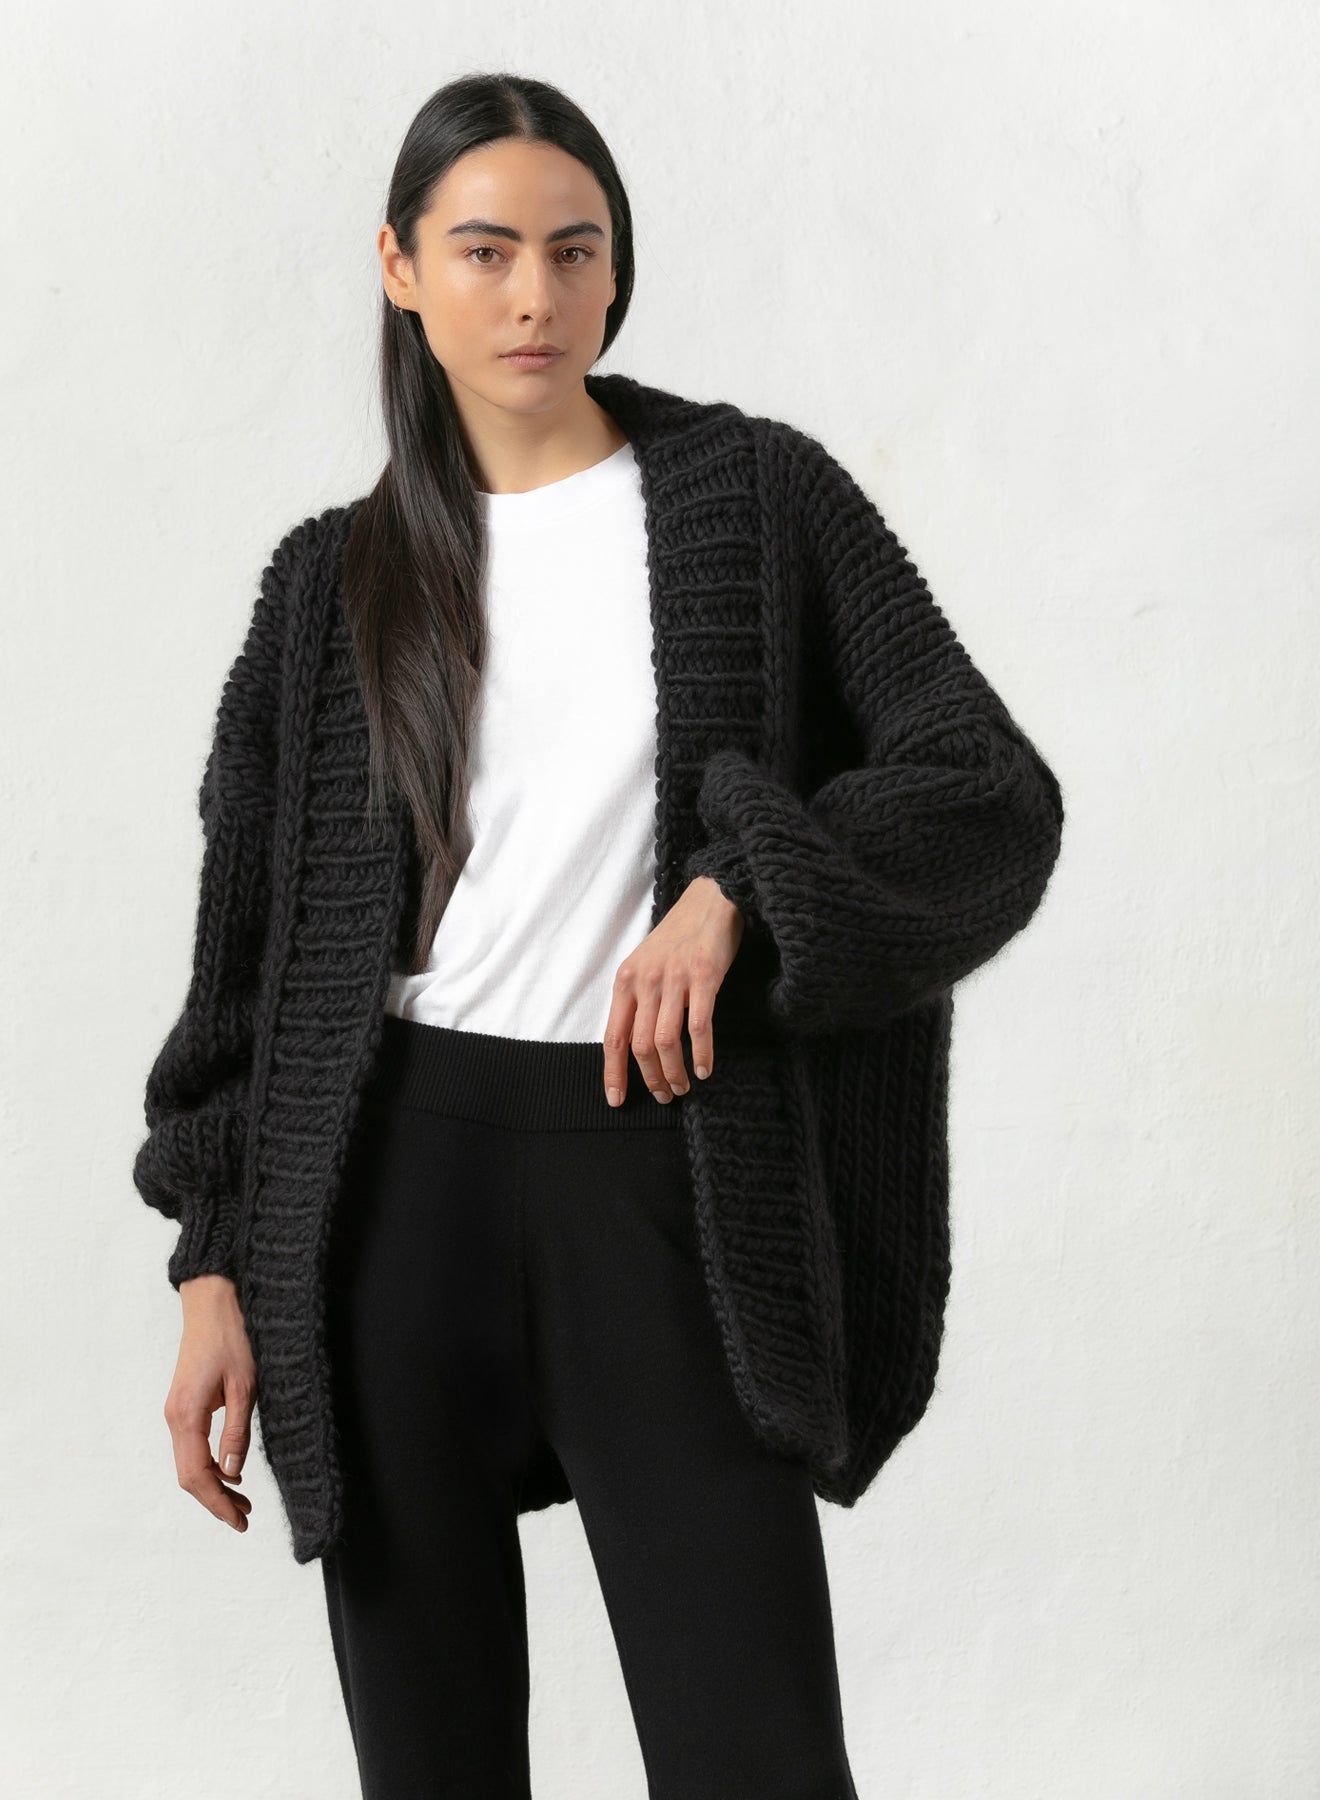 black cardigan chunky mr mittens knit knitwear winter collection outerwear